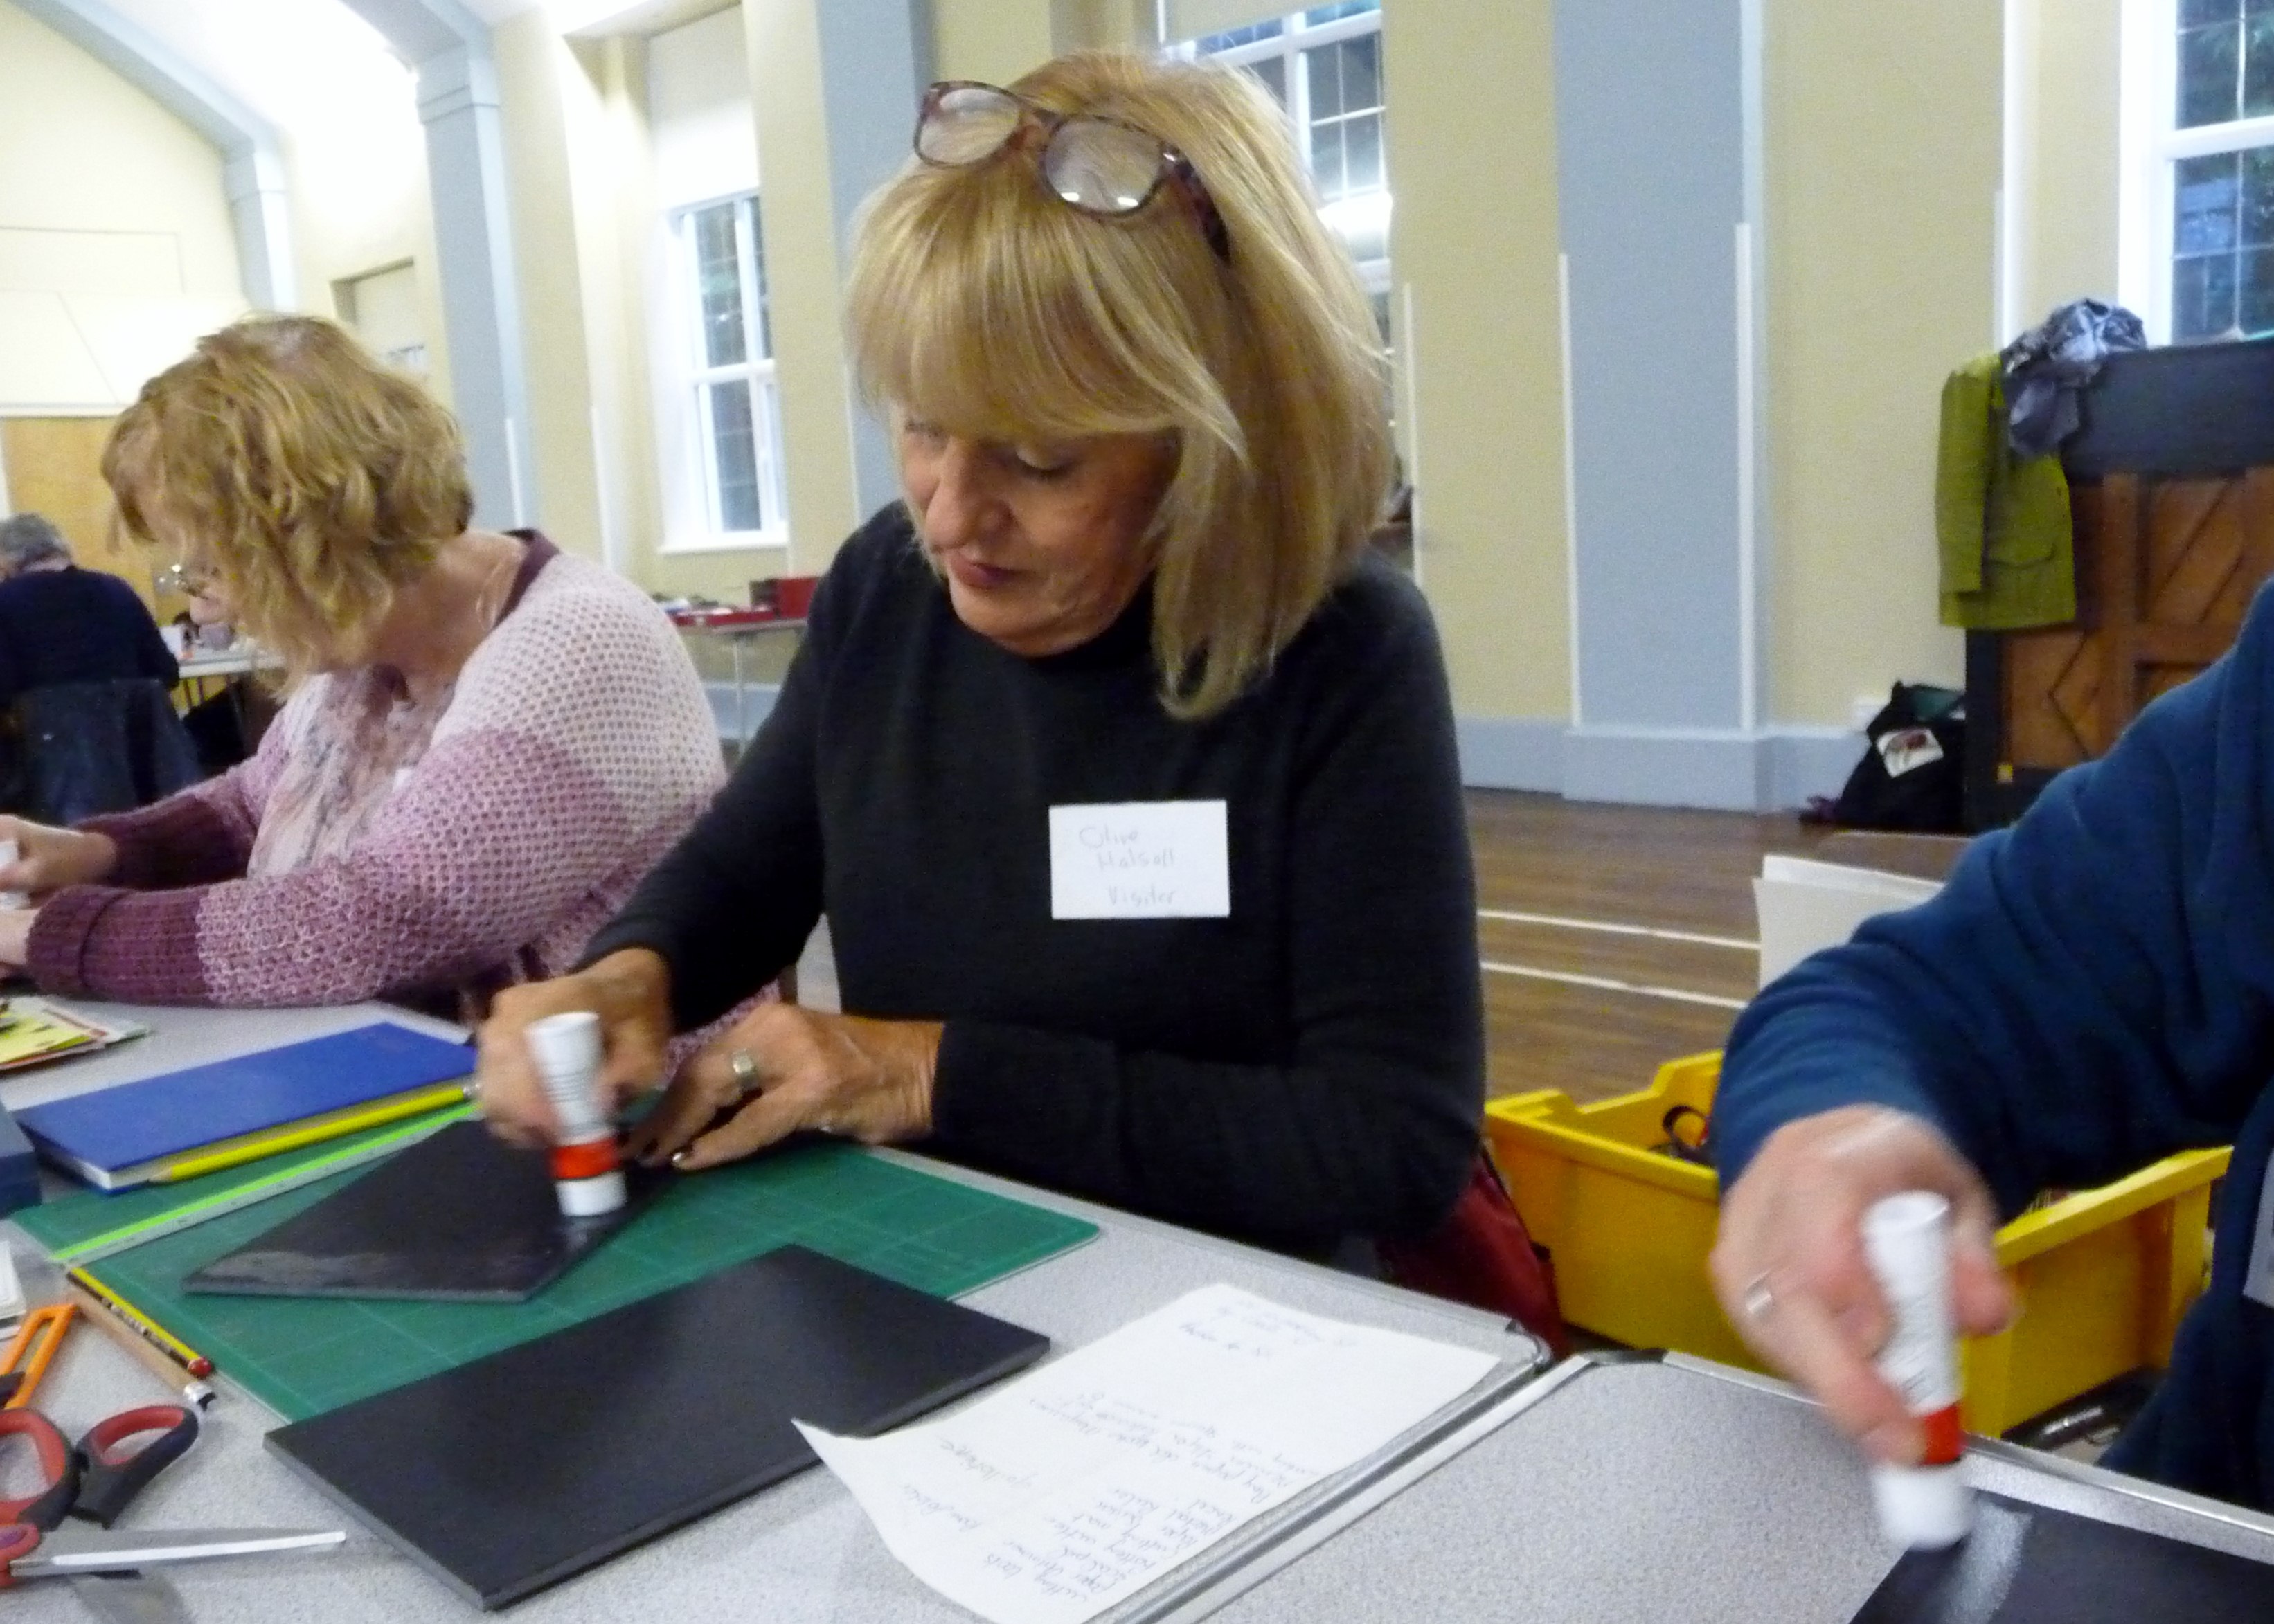 Bookbinding workshop- covering the book backs